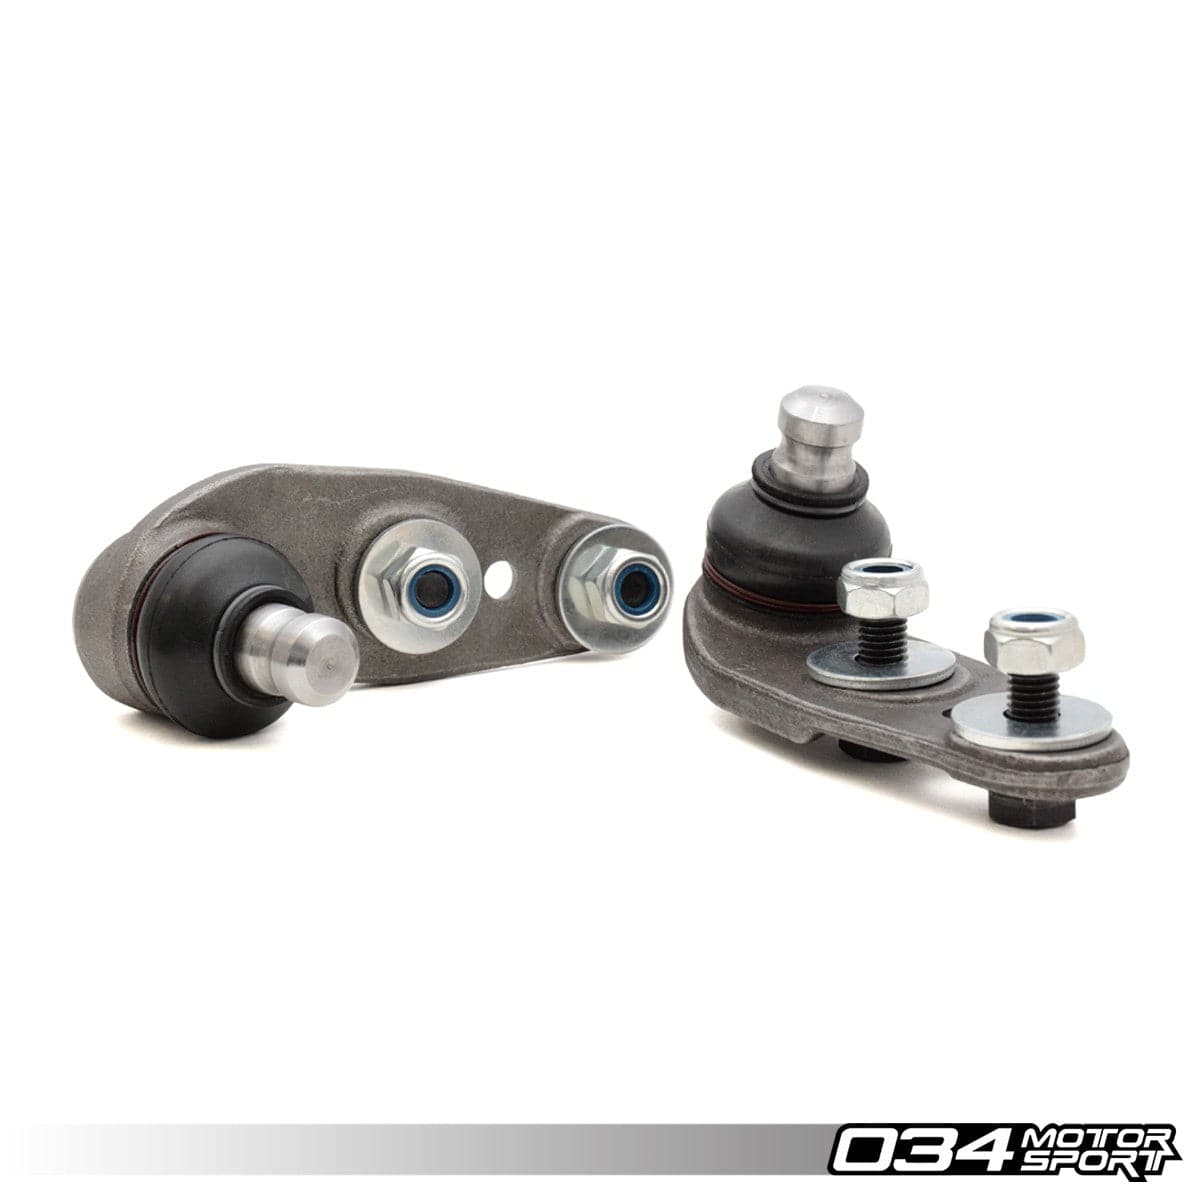 034Motorsport Audi BALL JOINT PAIR, URQUATTRO WITH 18MM SHAFT, LATE STYLE - ML Performance UK